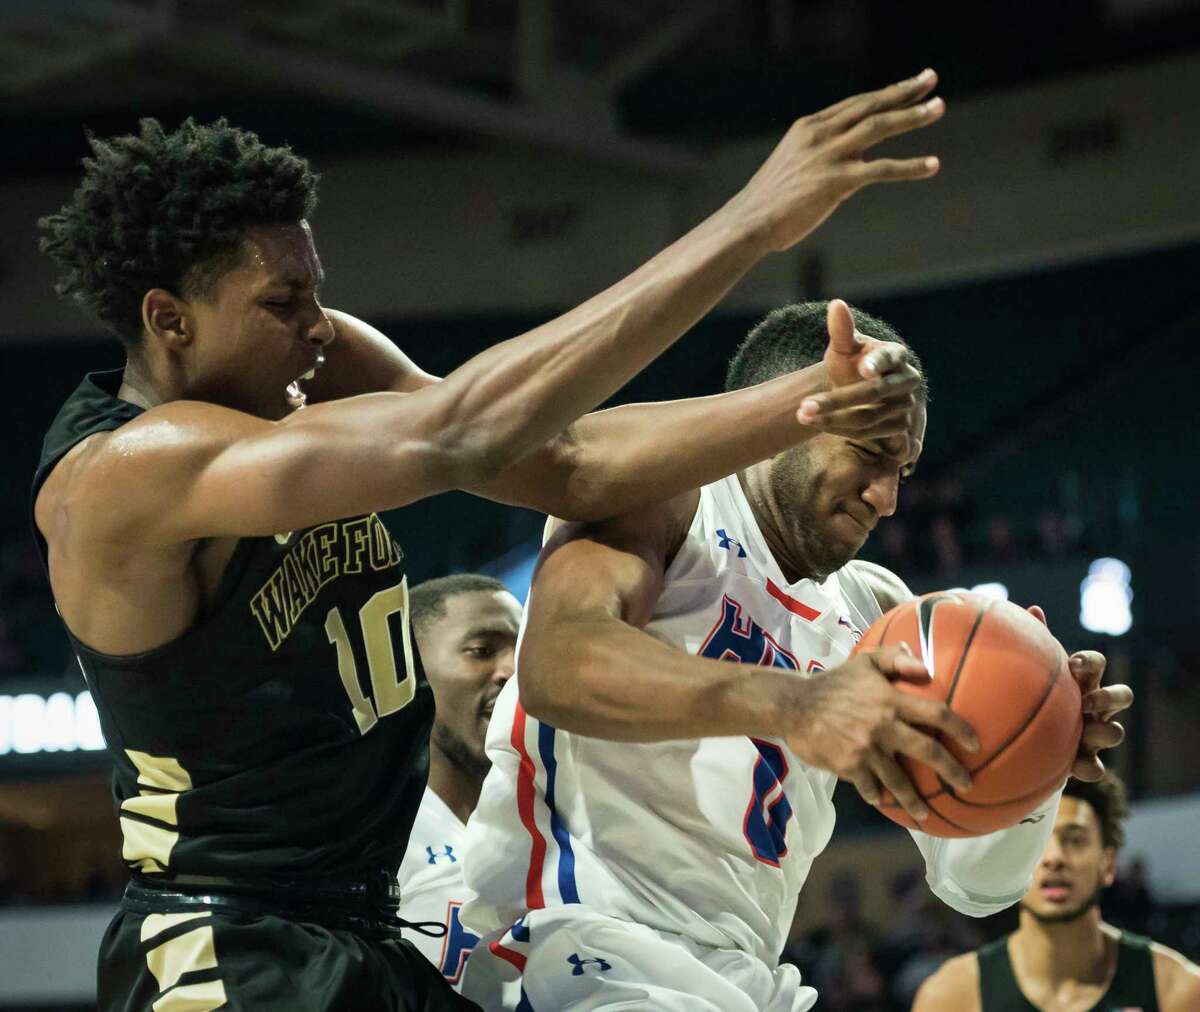 Houston Baptist guard Ian DuBose, right, grabs a rebound over Wake Forest forward Jaylen Hoard, left, in the second half of an NCAA college basketball game Friday, Nov. 23, 2018, in Winston-Salem, N.C. (Allison Lee Isley/The Winston-Salem Journal via AP) 